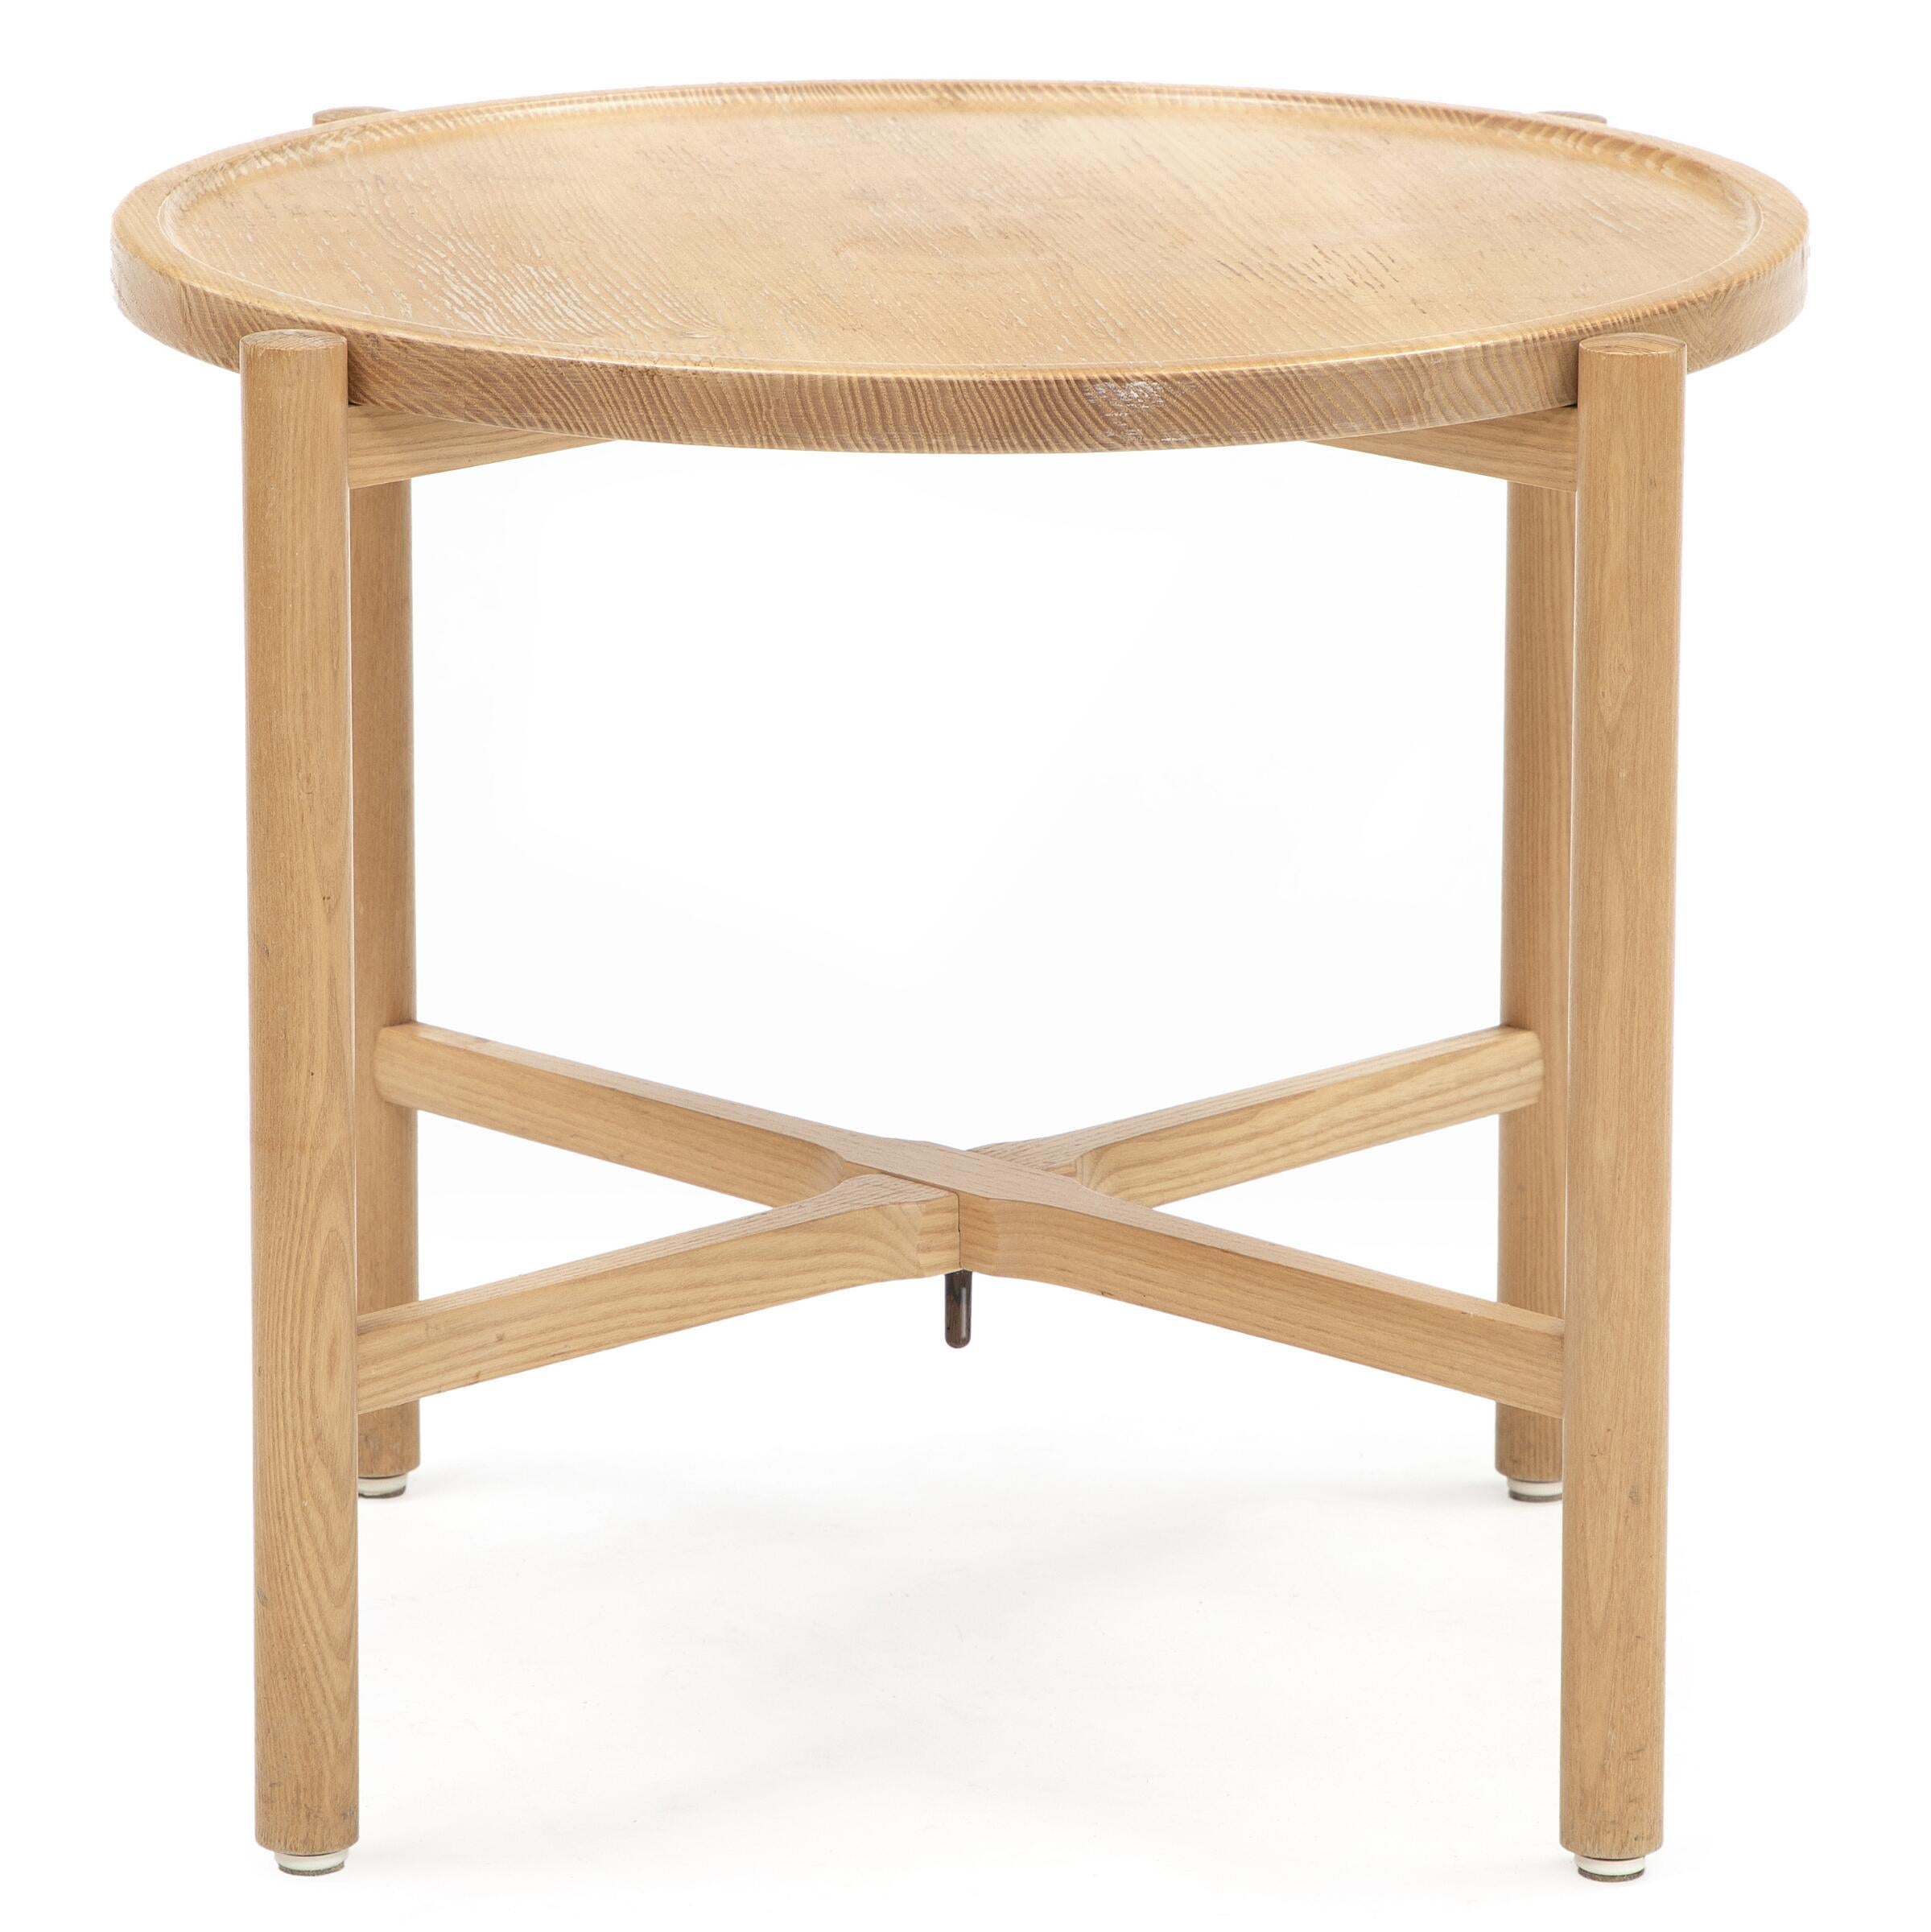 Hans J. Wegner: “PP 35” Solid Ash Wood Tray Table with circular, reversible top. Designed 1945. Manufactured and marked by PP Møbler. 

Model presented at The Copenhagen Cabinetmakers 20th Guild Exhibition at Design Museum Denmark, 27. Sept. -